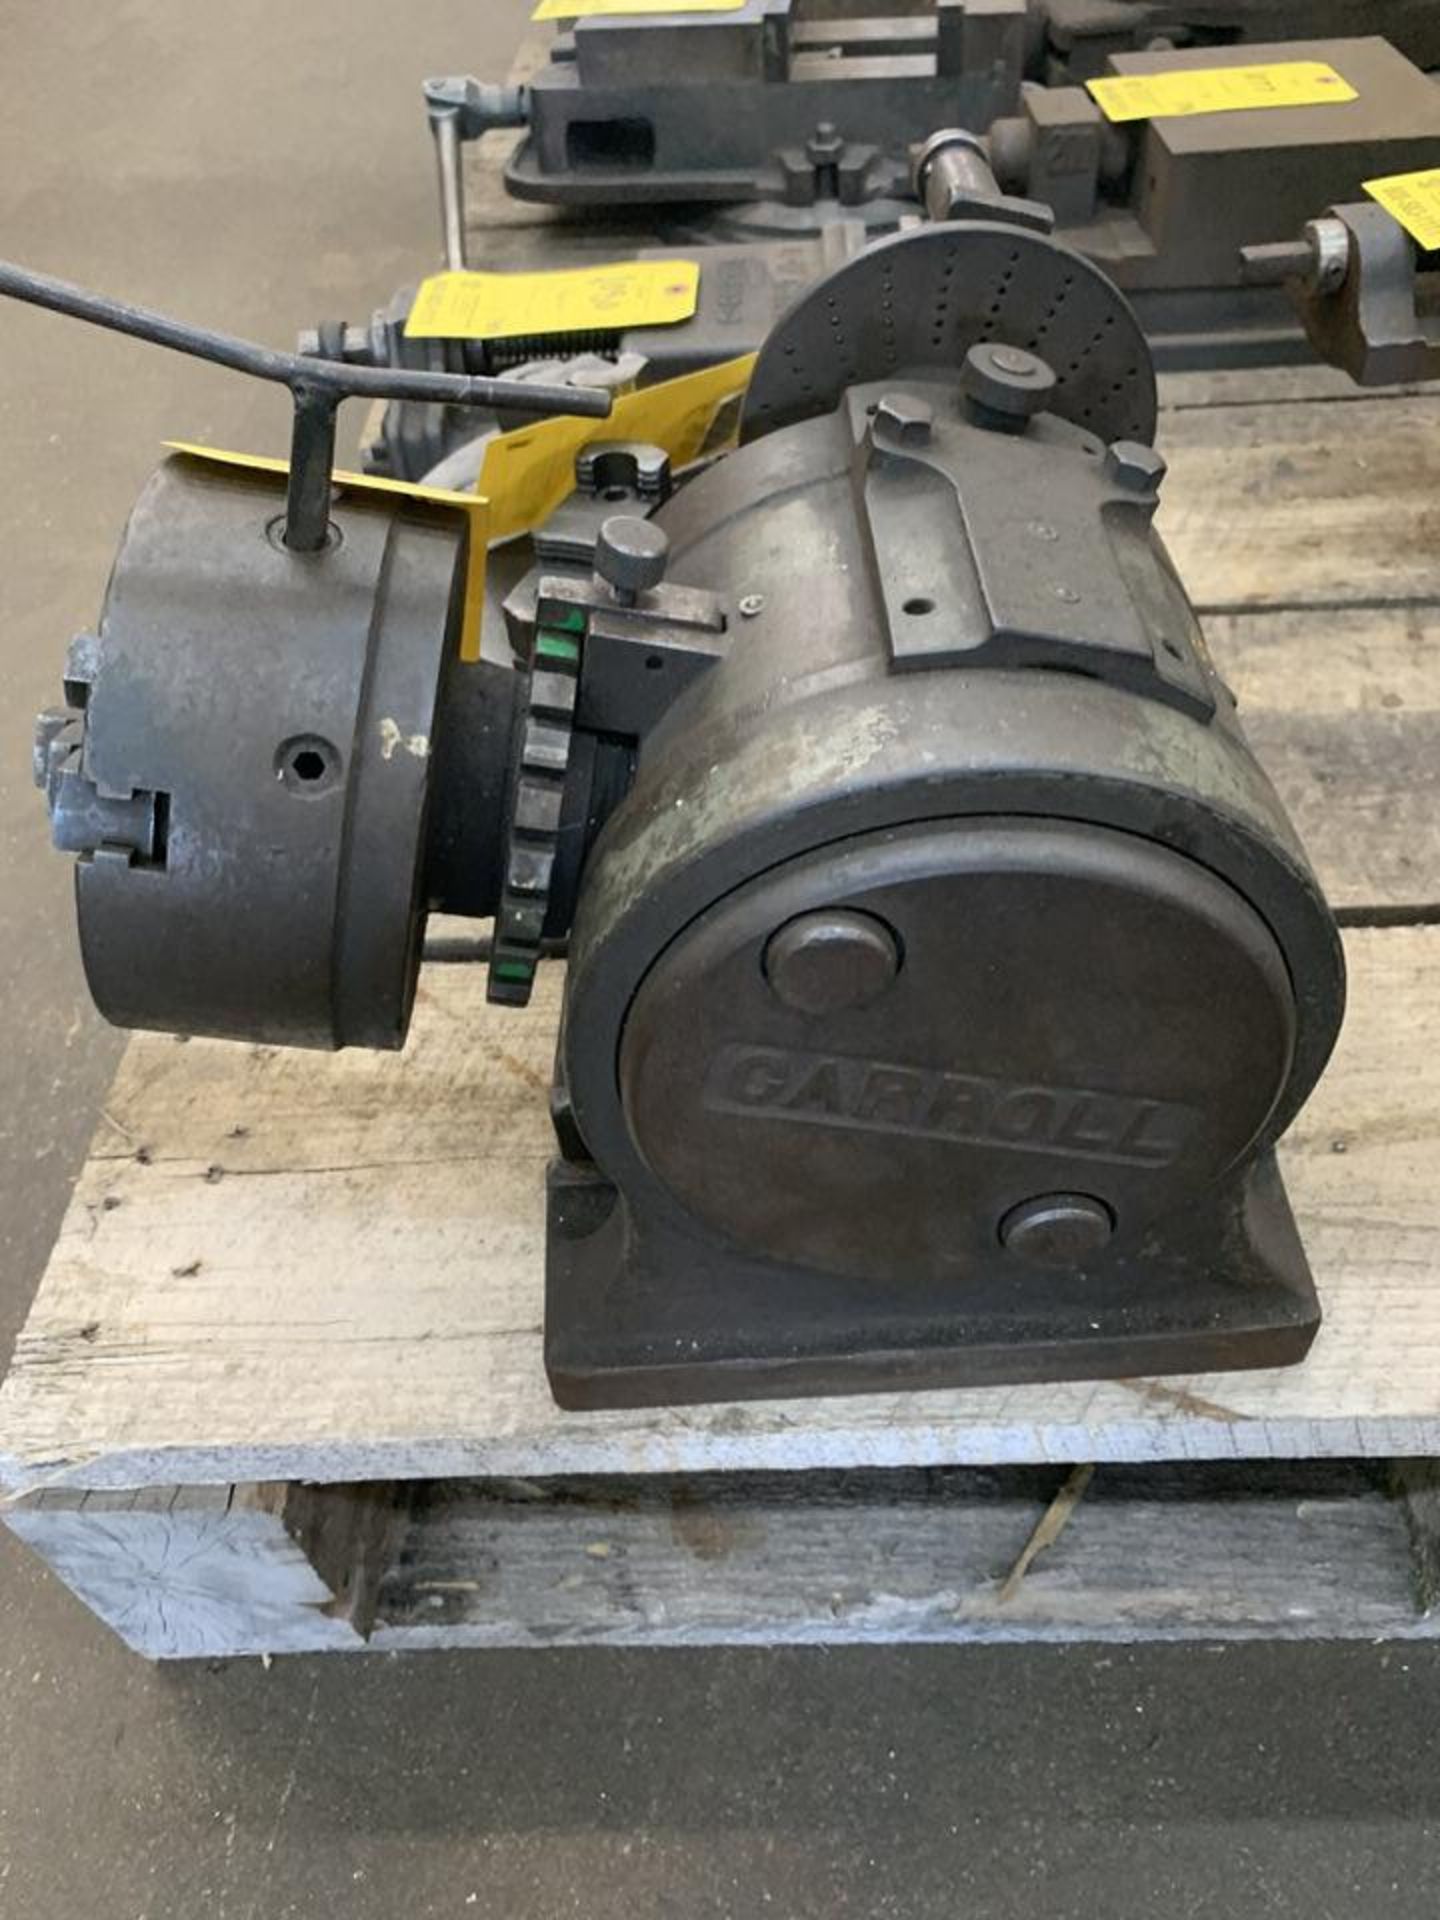 6" Carroll Indexing Chuck with 1.5" Thru-hole